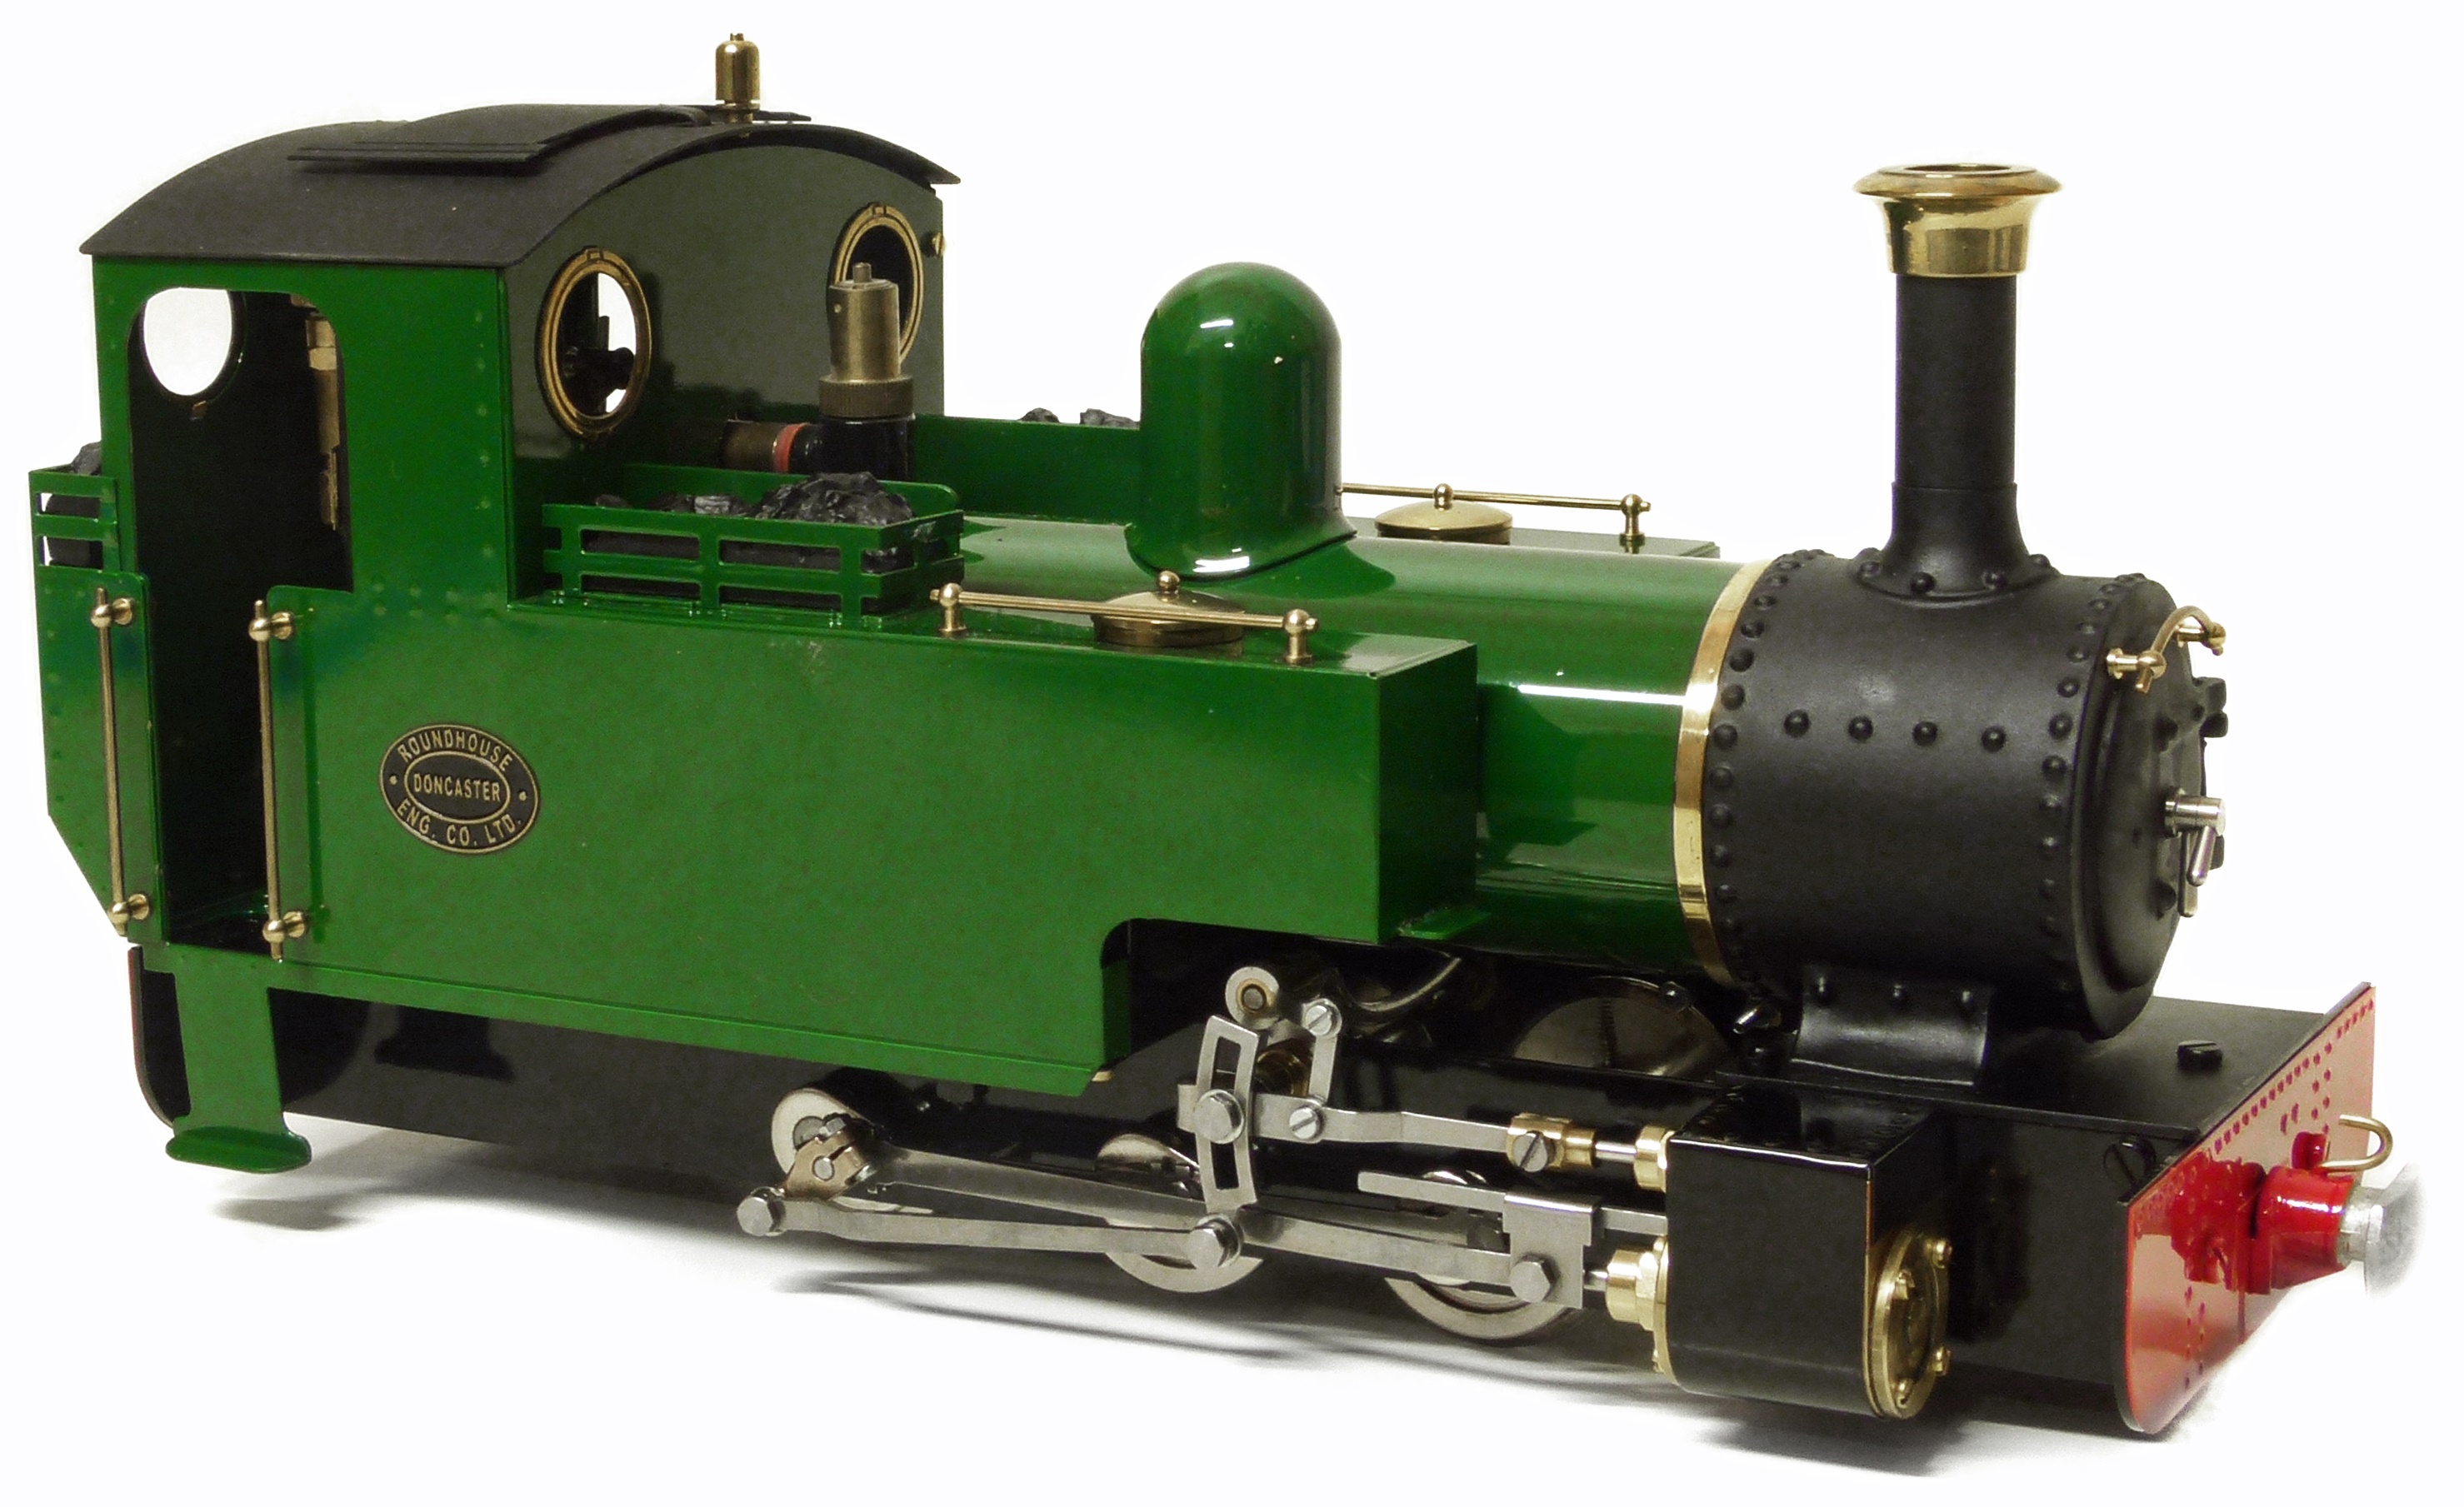 Roundhouse 'Lady Anne' live steam 16mm 0-6-0 locomotive.